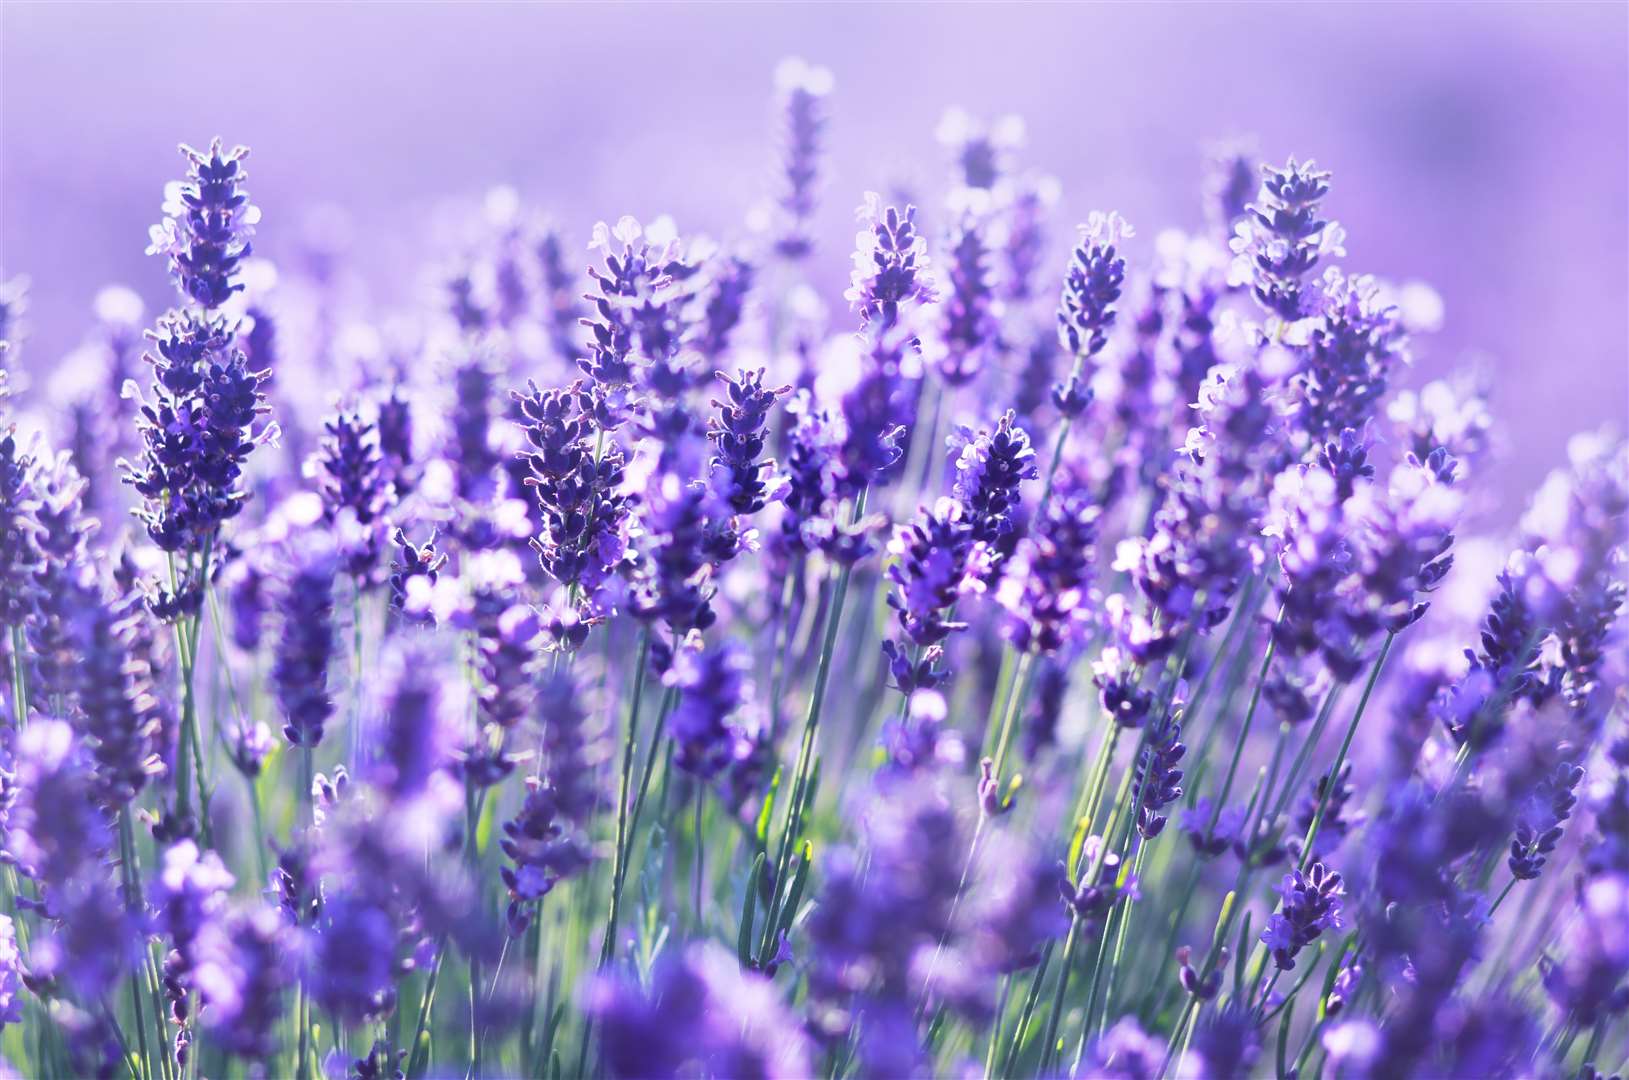 Lavender oils or cleaning products can help dissuade critters. Image: Stock photo.